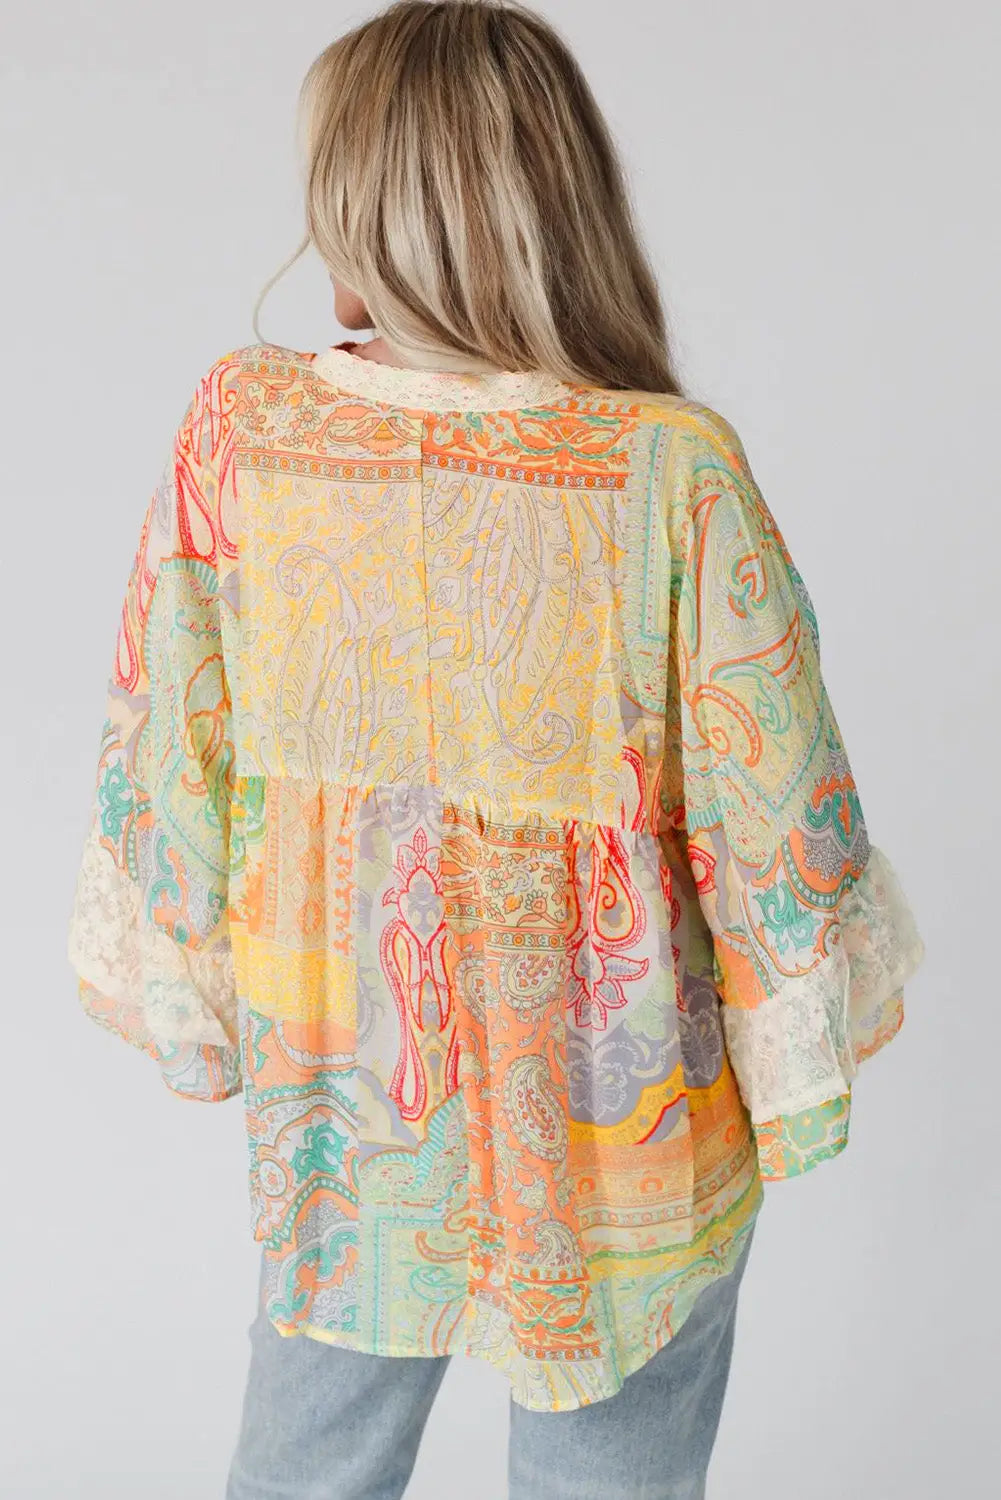 Multicolor paisley print bell sleeve lace v-neck button sheer blouse - tops